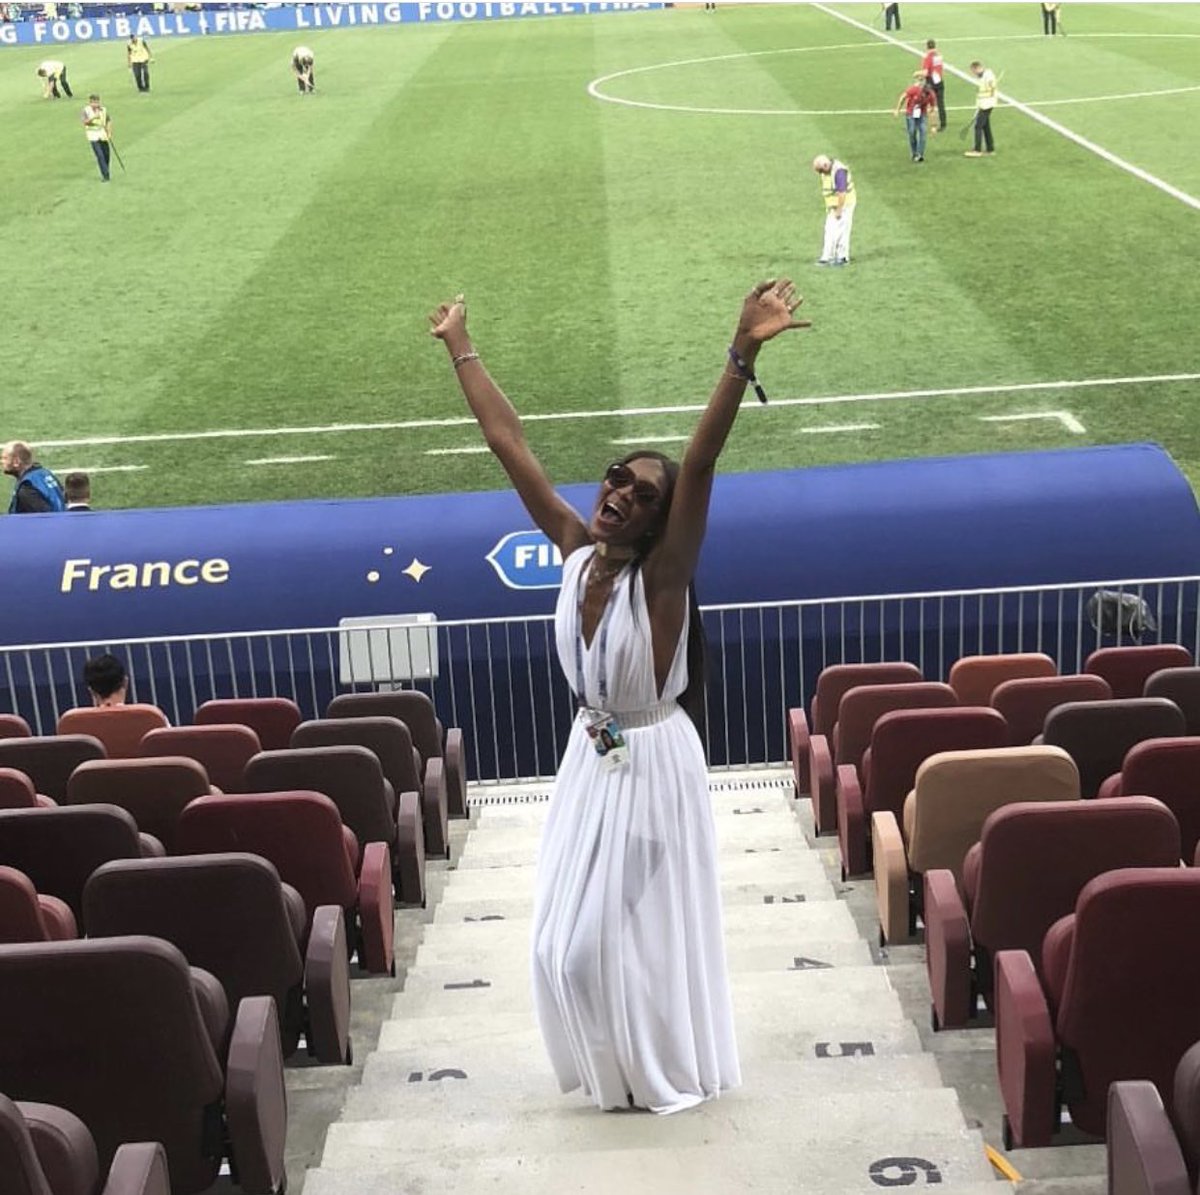 VIVA FRANCE ♥️????????⚽️ #WORLDCUP2018 RUSSIAWITHLOVE ♥️SS19 #azzedinealaia https://t.co/aJWd5WKjMo